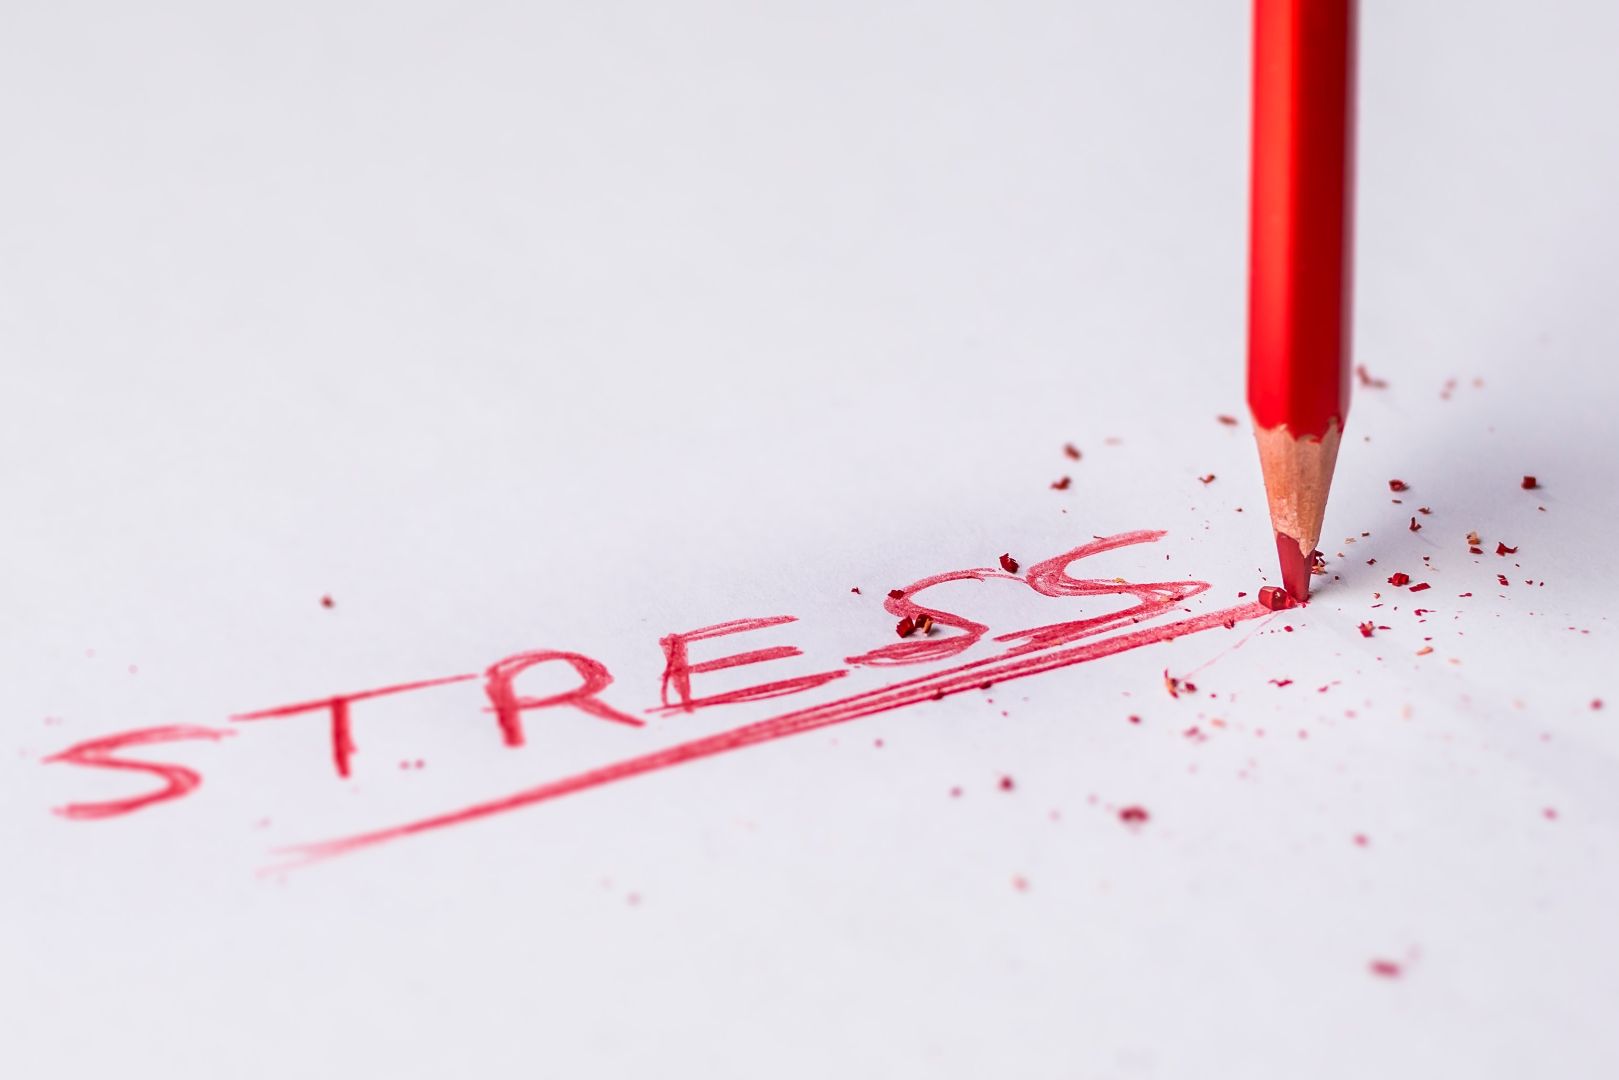 The word 'stress' written in red ink